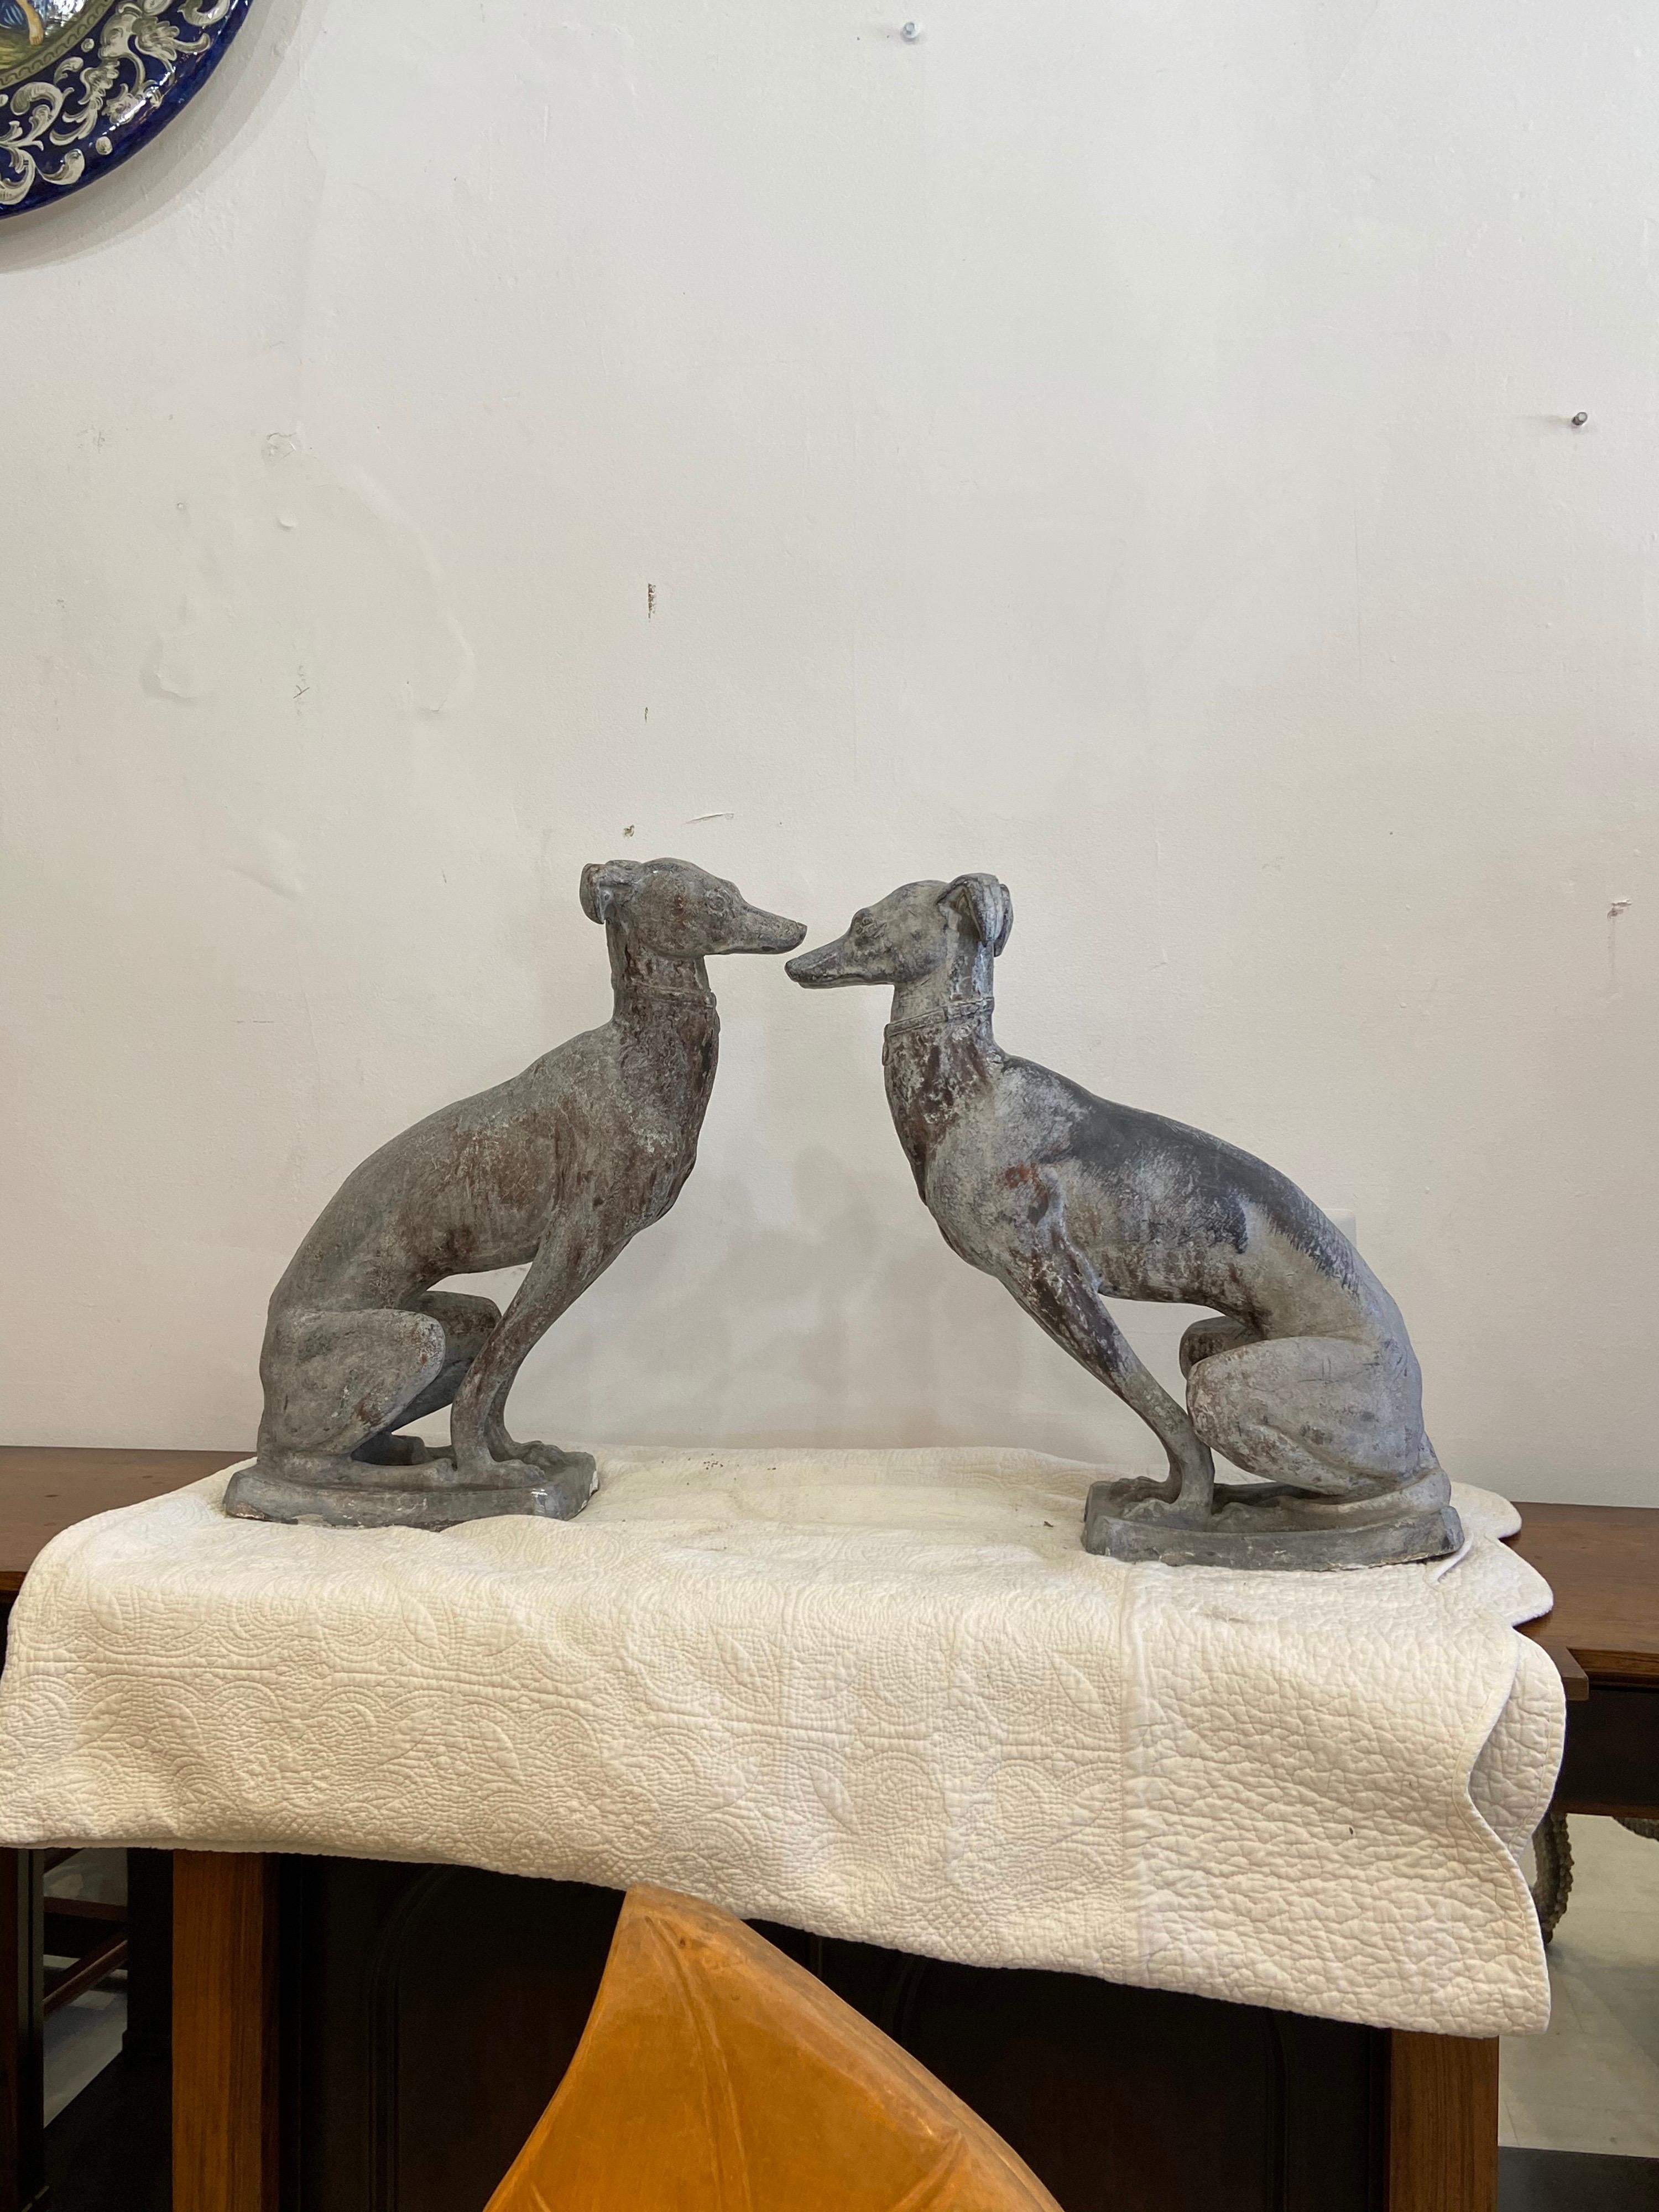 where can you find this pair of art deco statues